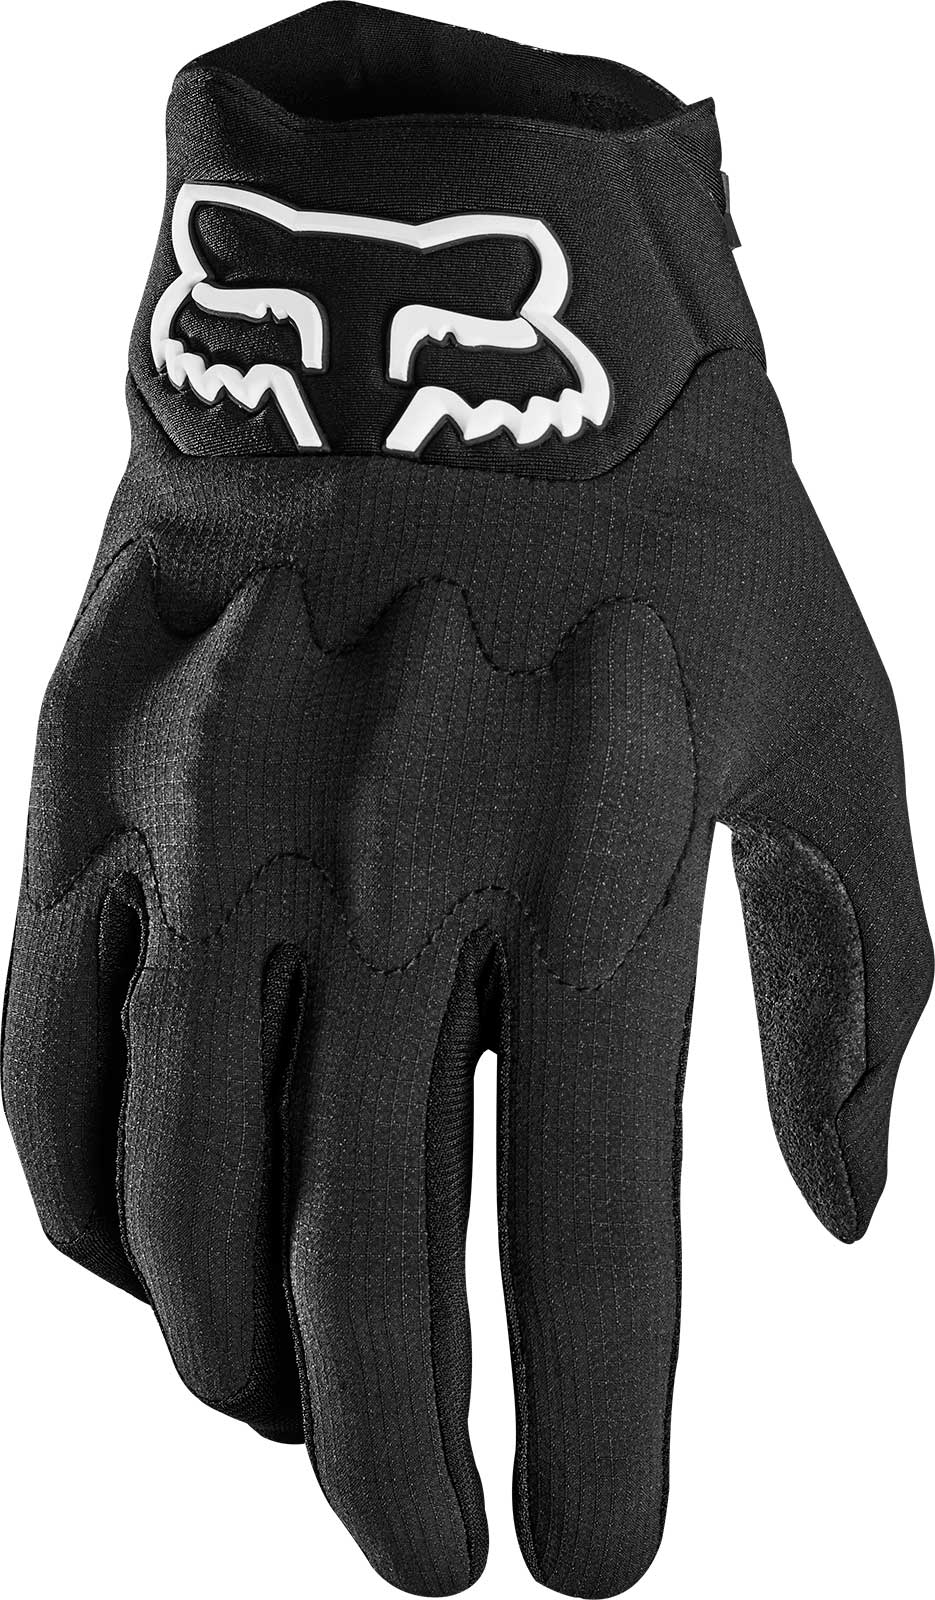 NEW Fox Bomber Leather Motorcycle MTB Gloves Outdoor Enduro Cycling Riding 